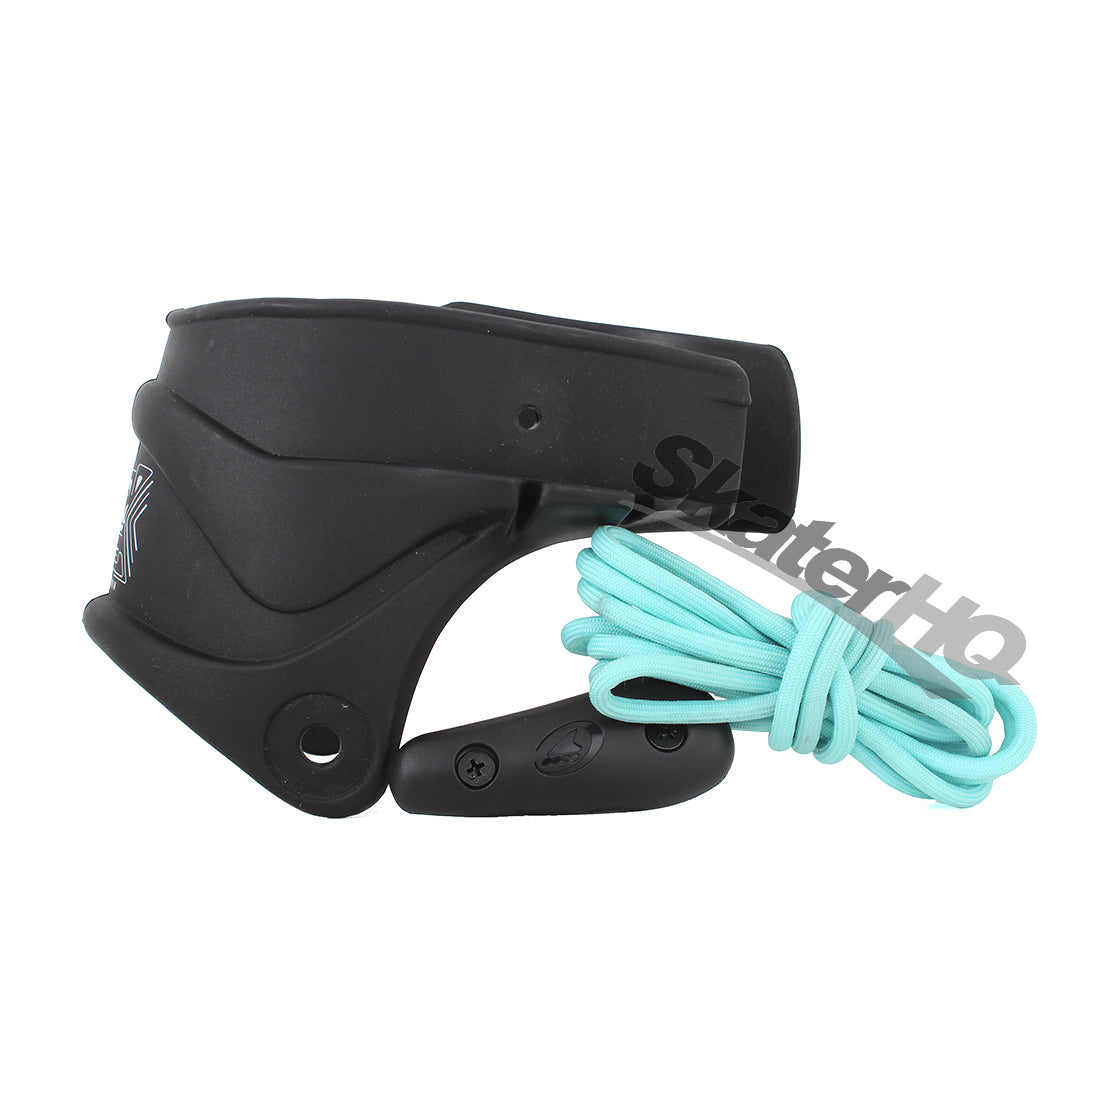 Rollerblade Twister Cuff Kit - Black/Teal Inline Hardware and Parts